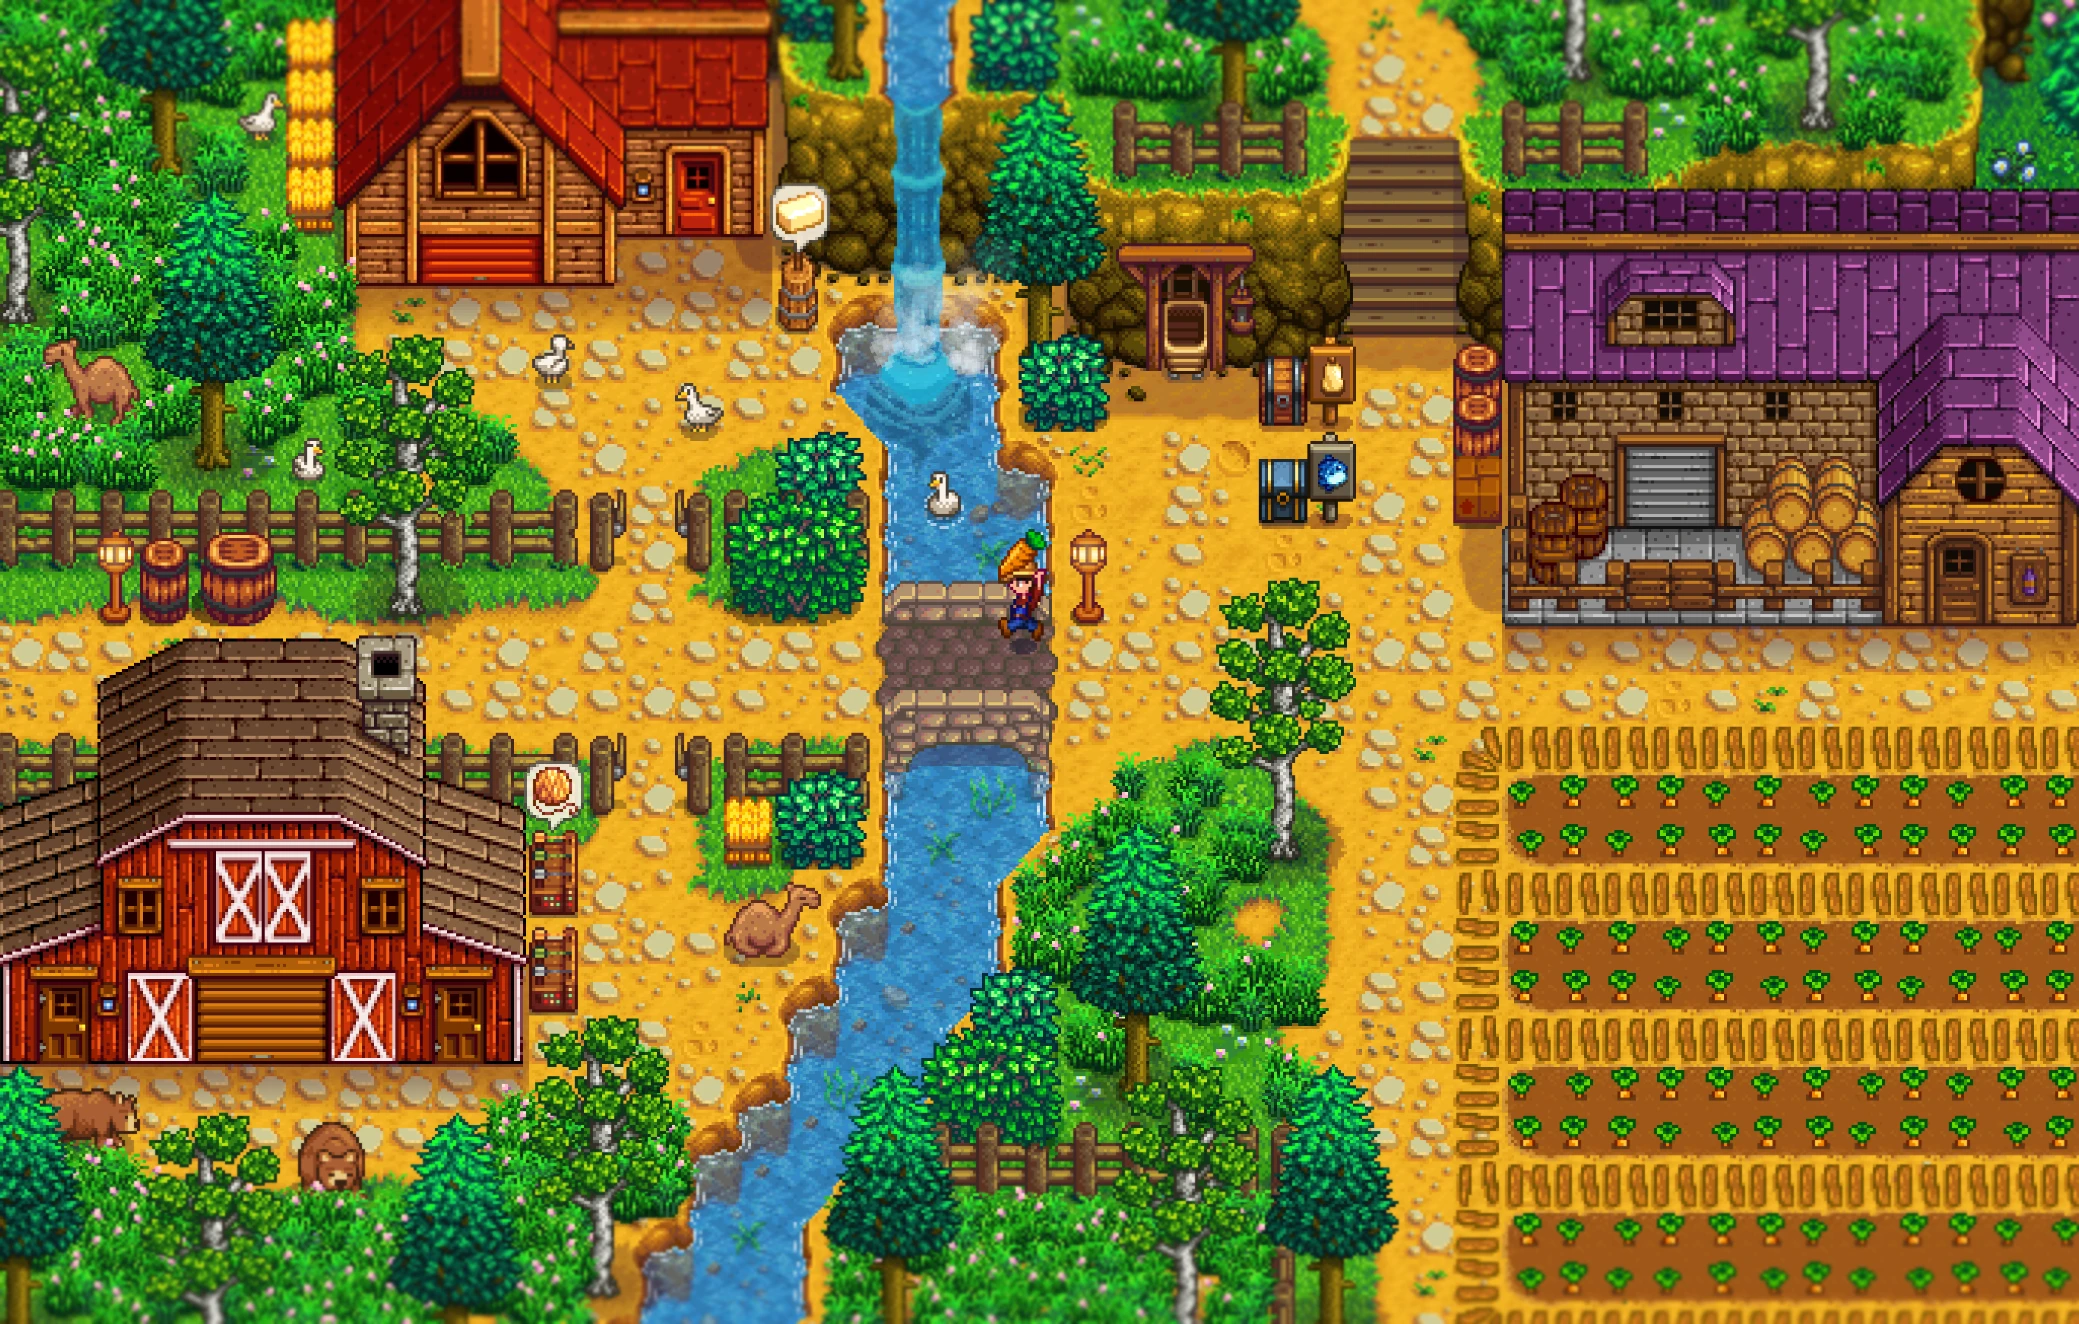 Stardew Valley Expanded new content teaser at Stardew Valley Nexus - Mods  and community